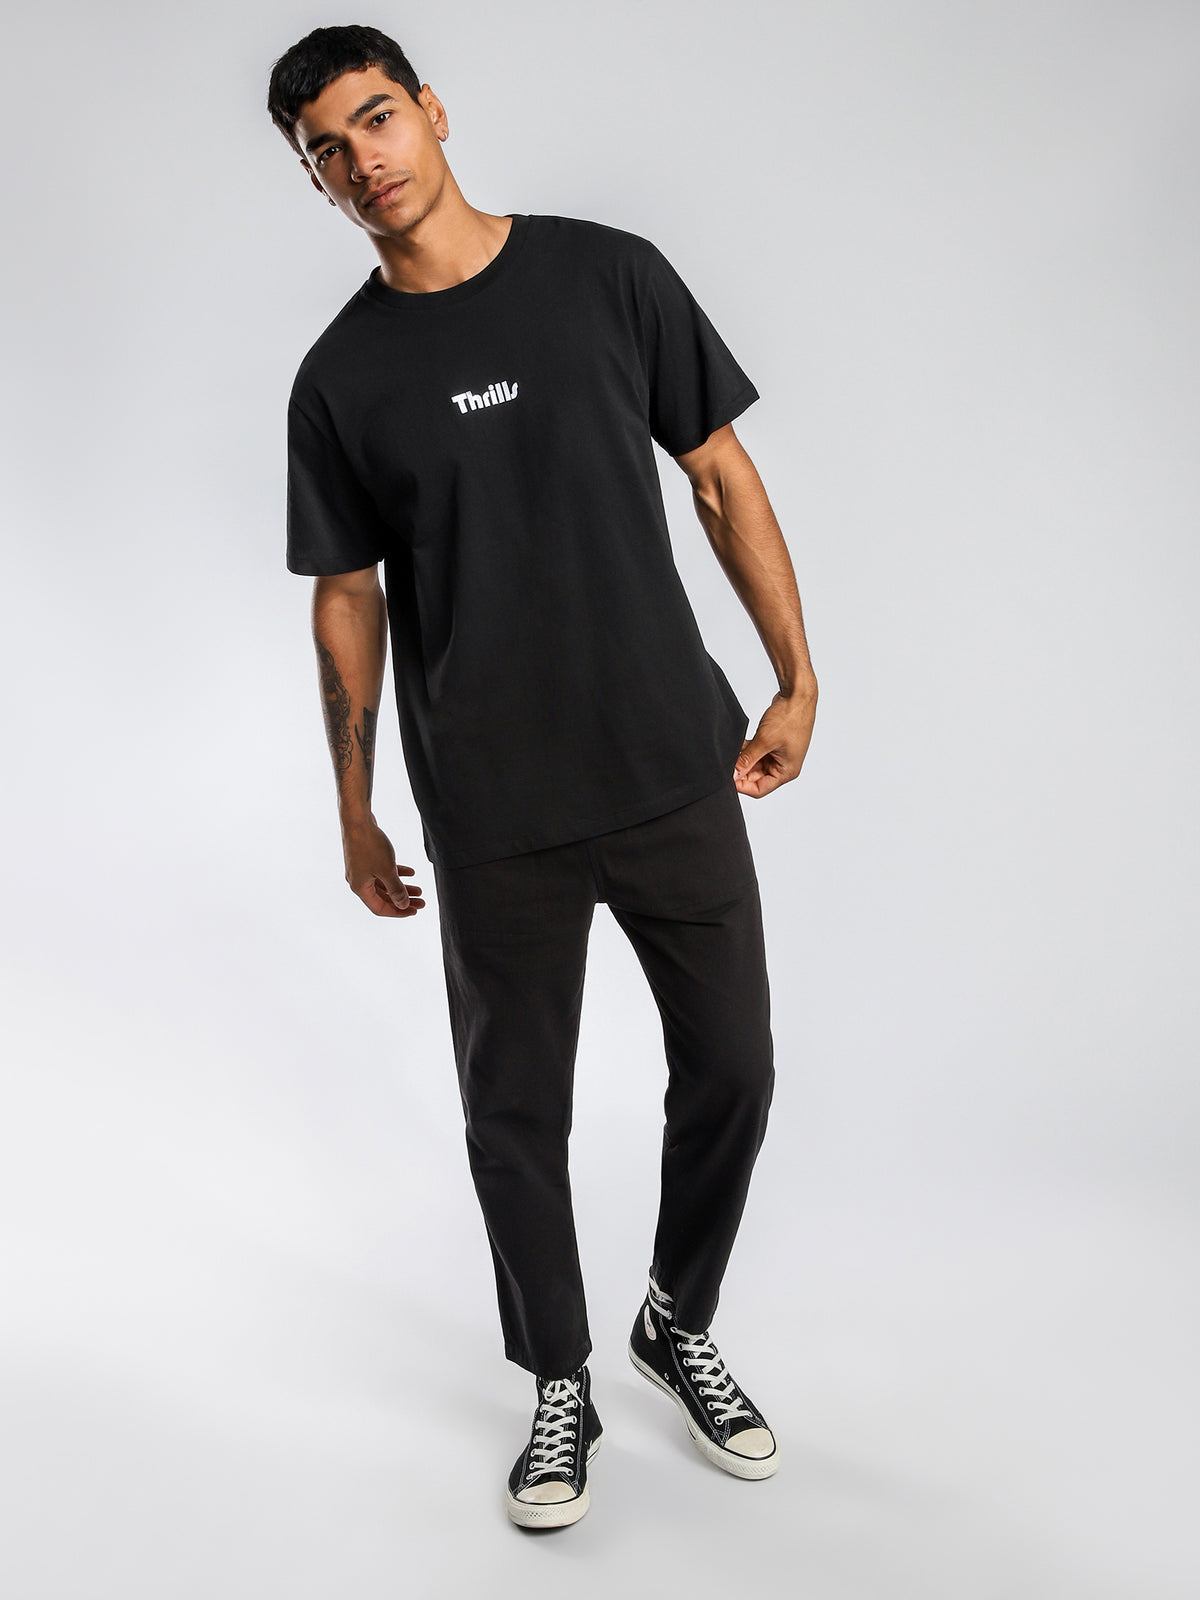 Trade Merch Fit T-Shirt in Black